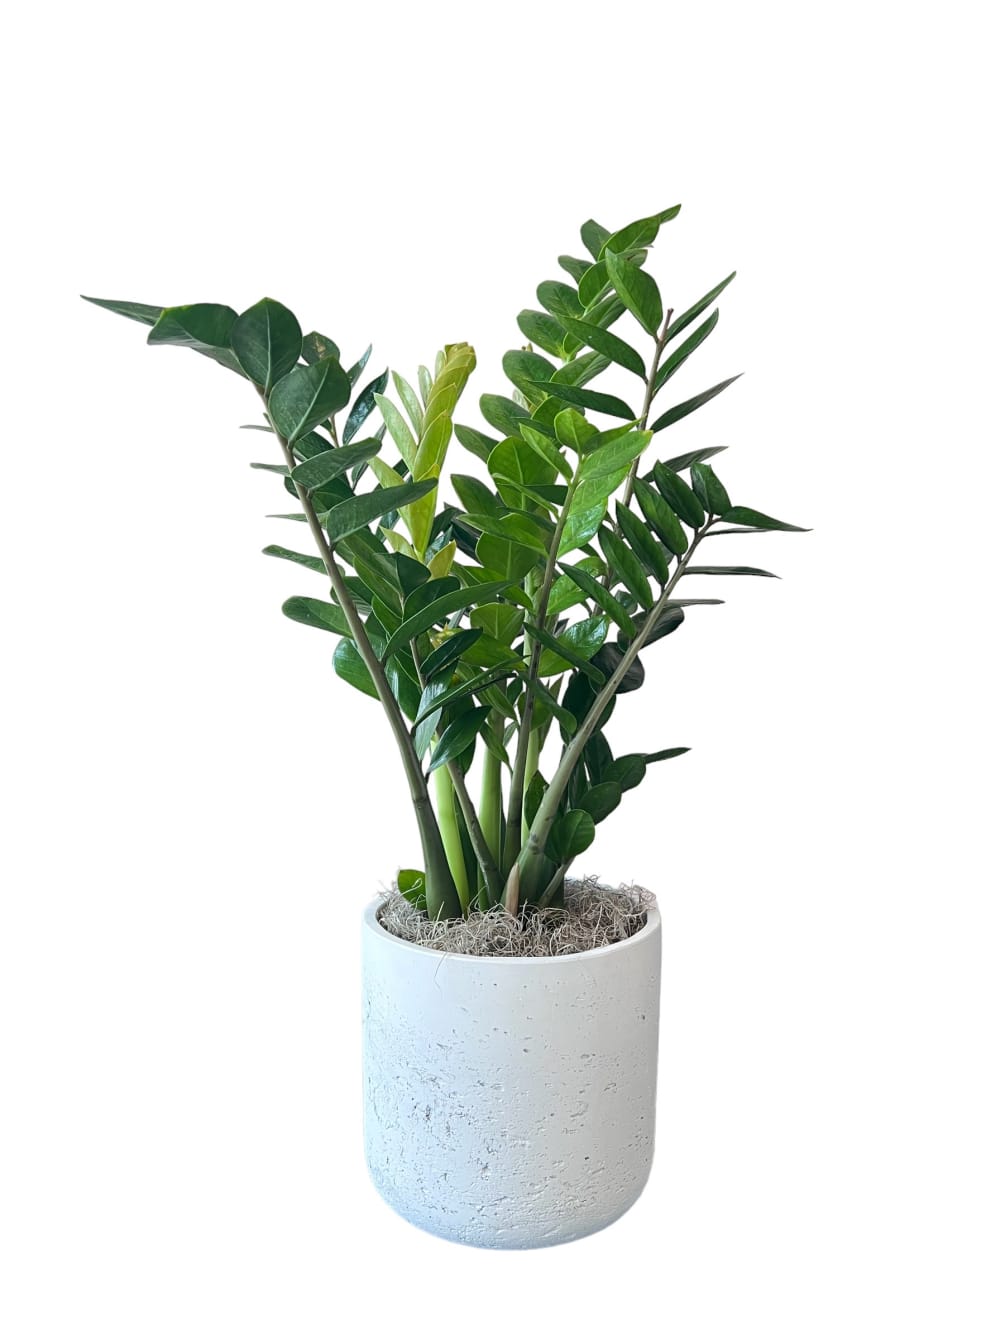 Zamioculcas plant in white/grey pot as shown in photo.
Approximate size:10&quot; by 10&quot;